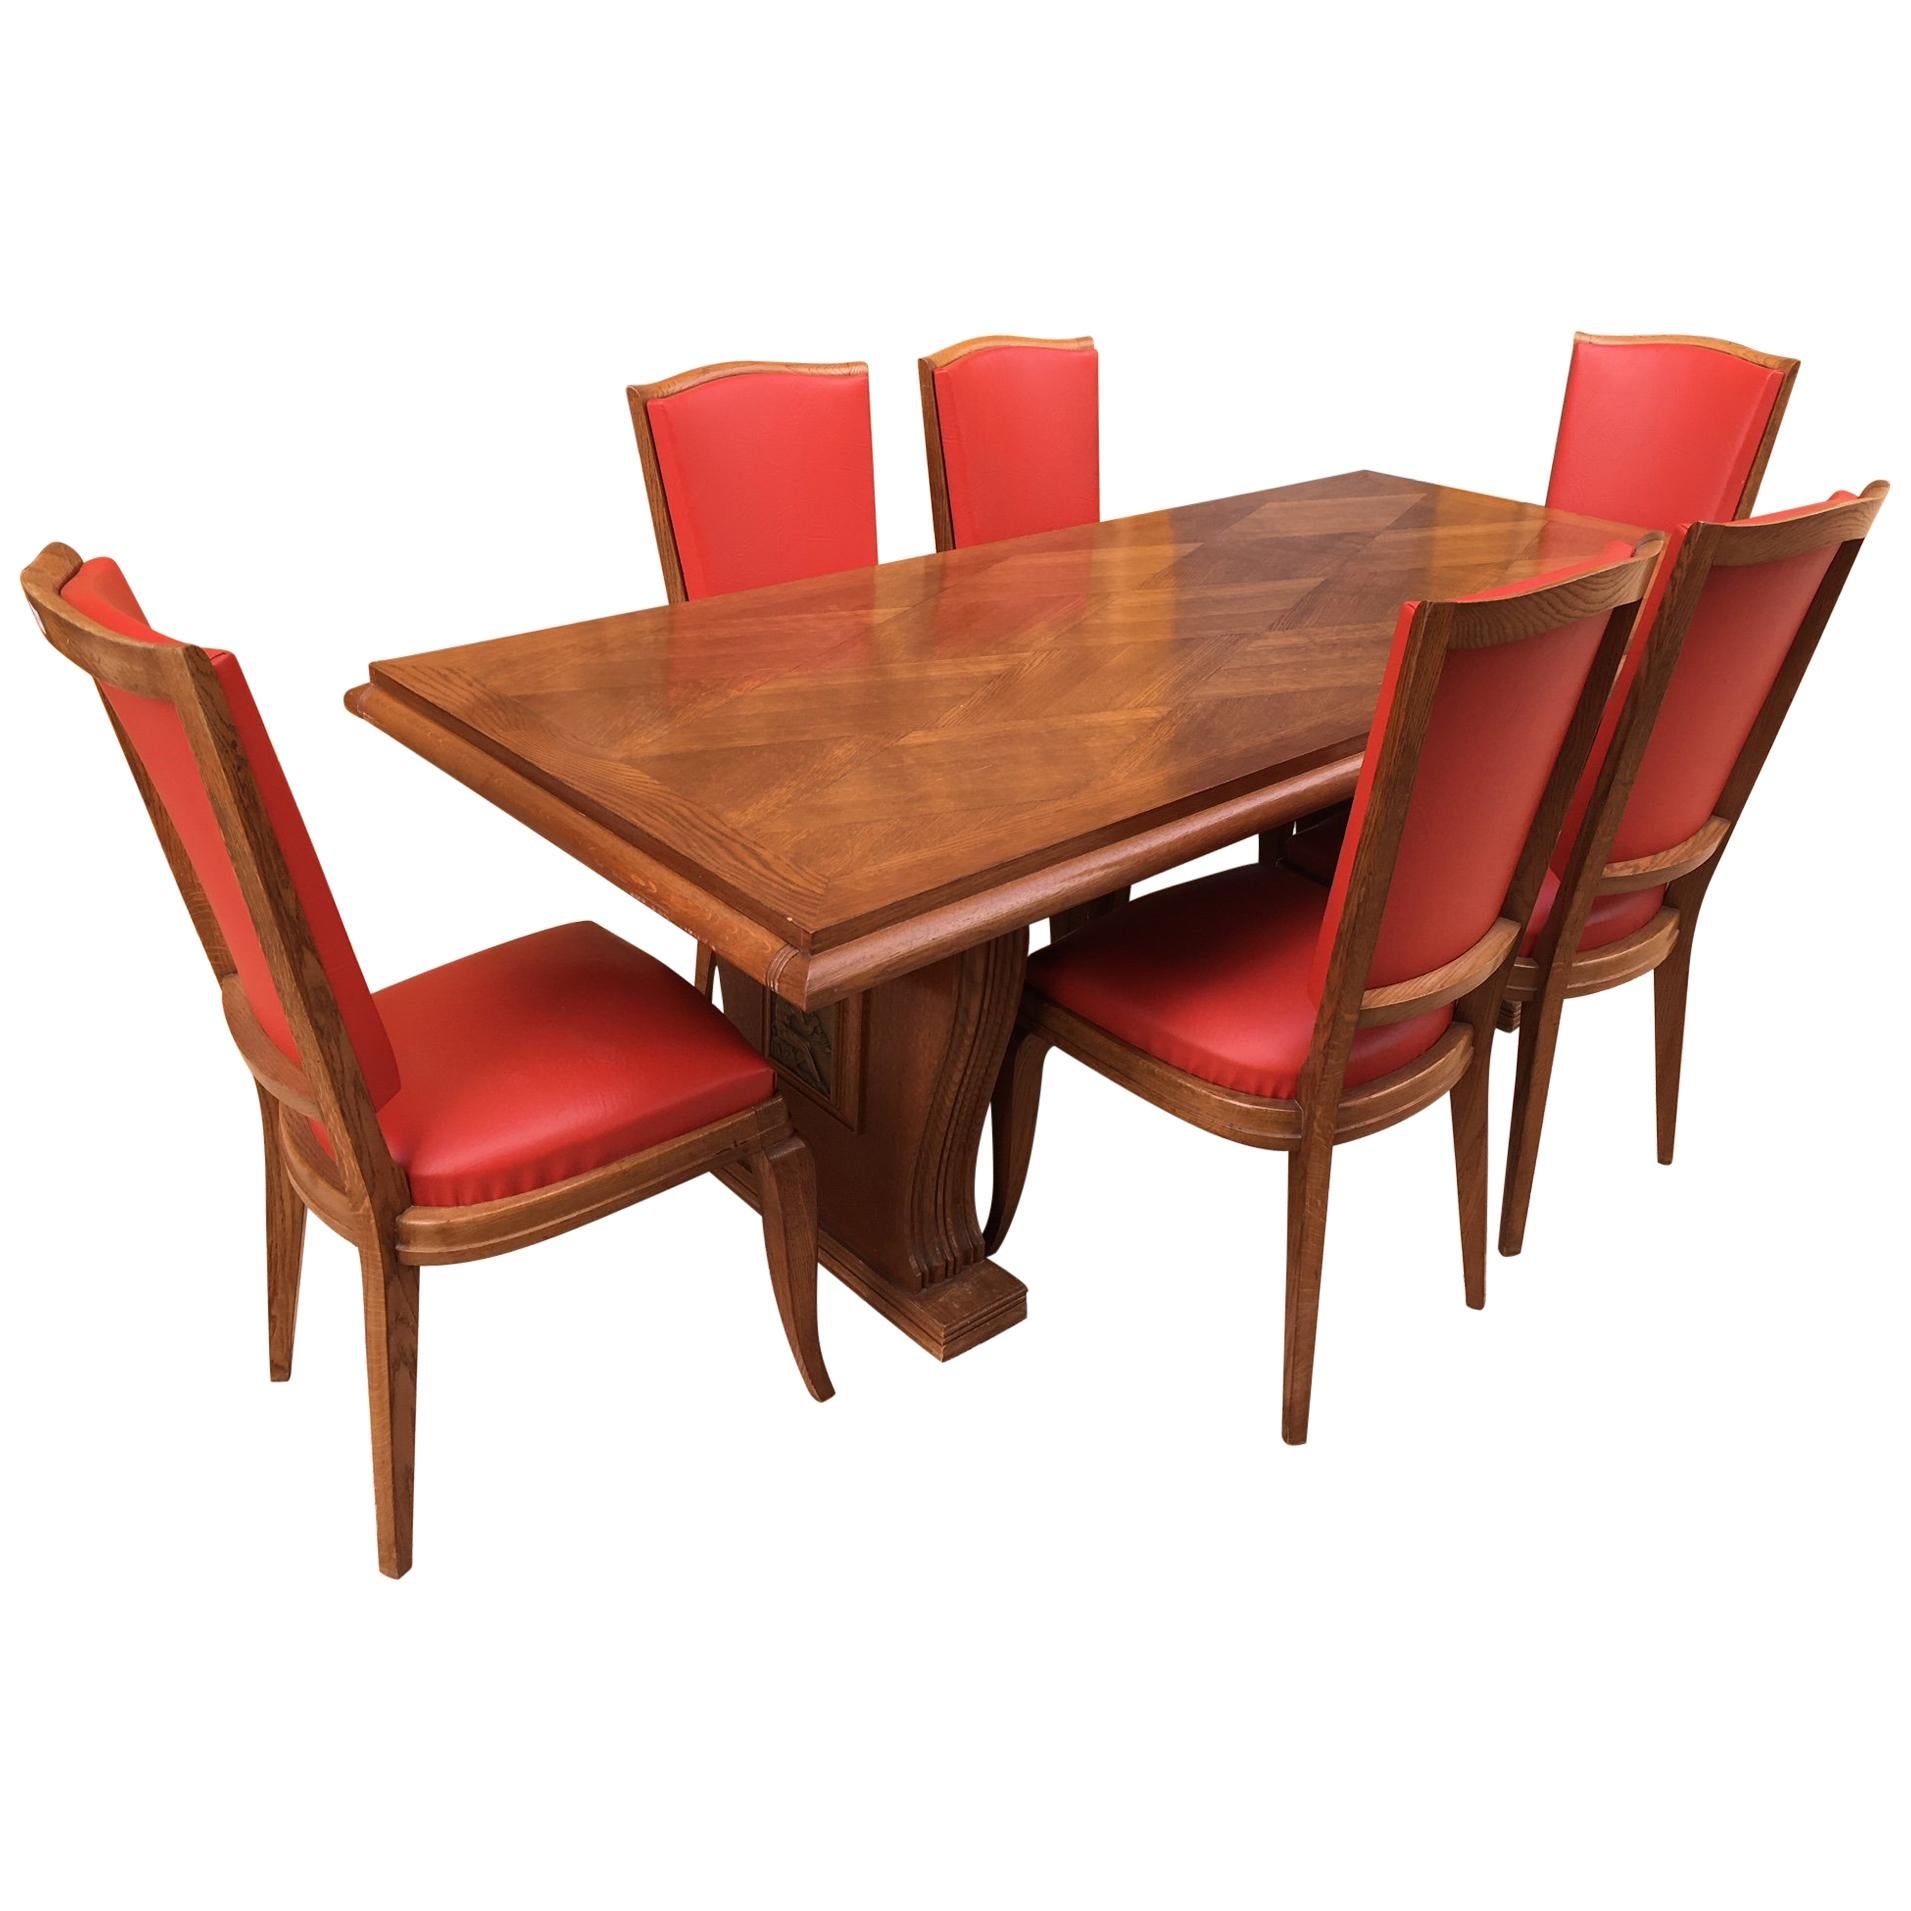 French Maxime Old Style Oak Table with 6 Chairs, 1940s